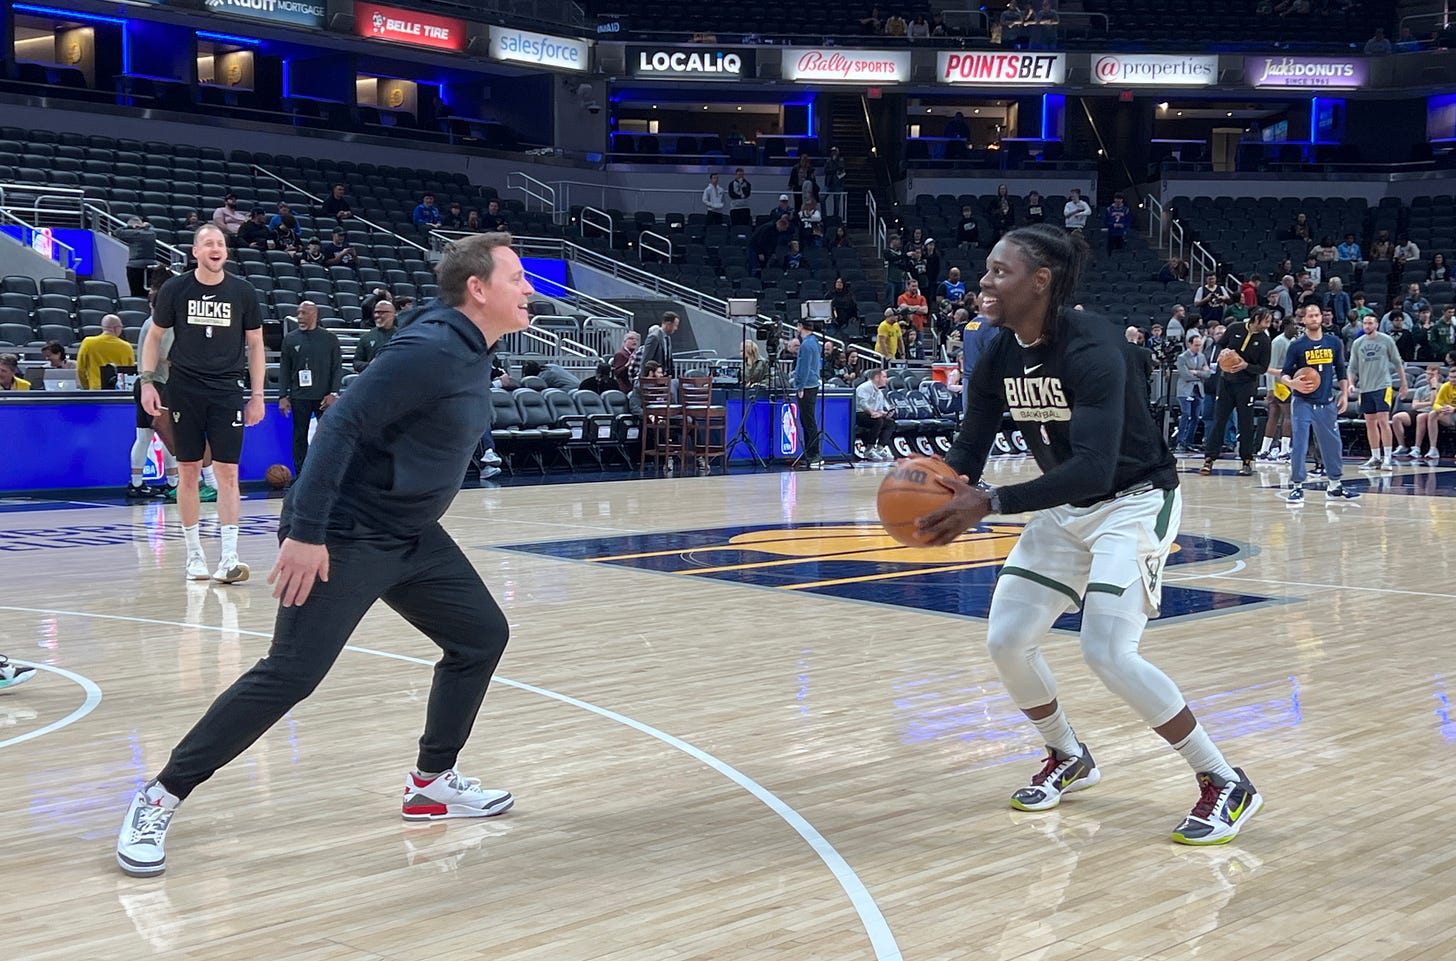 Jrue Holiday going through his warmup against Bucks assistant coach Chad Forcier.